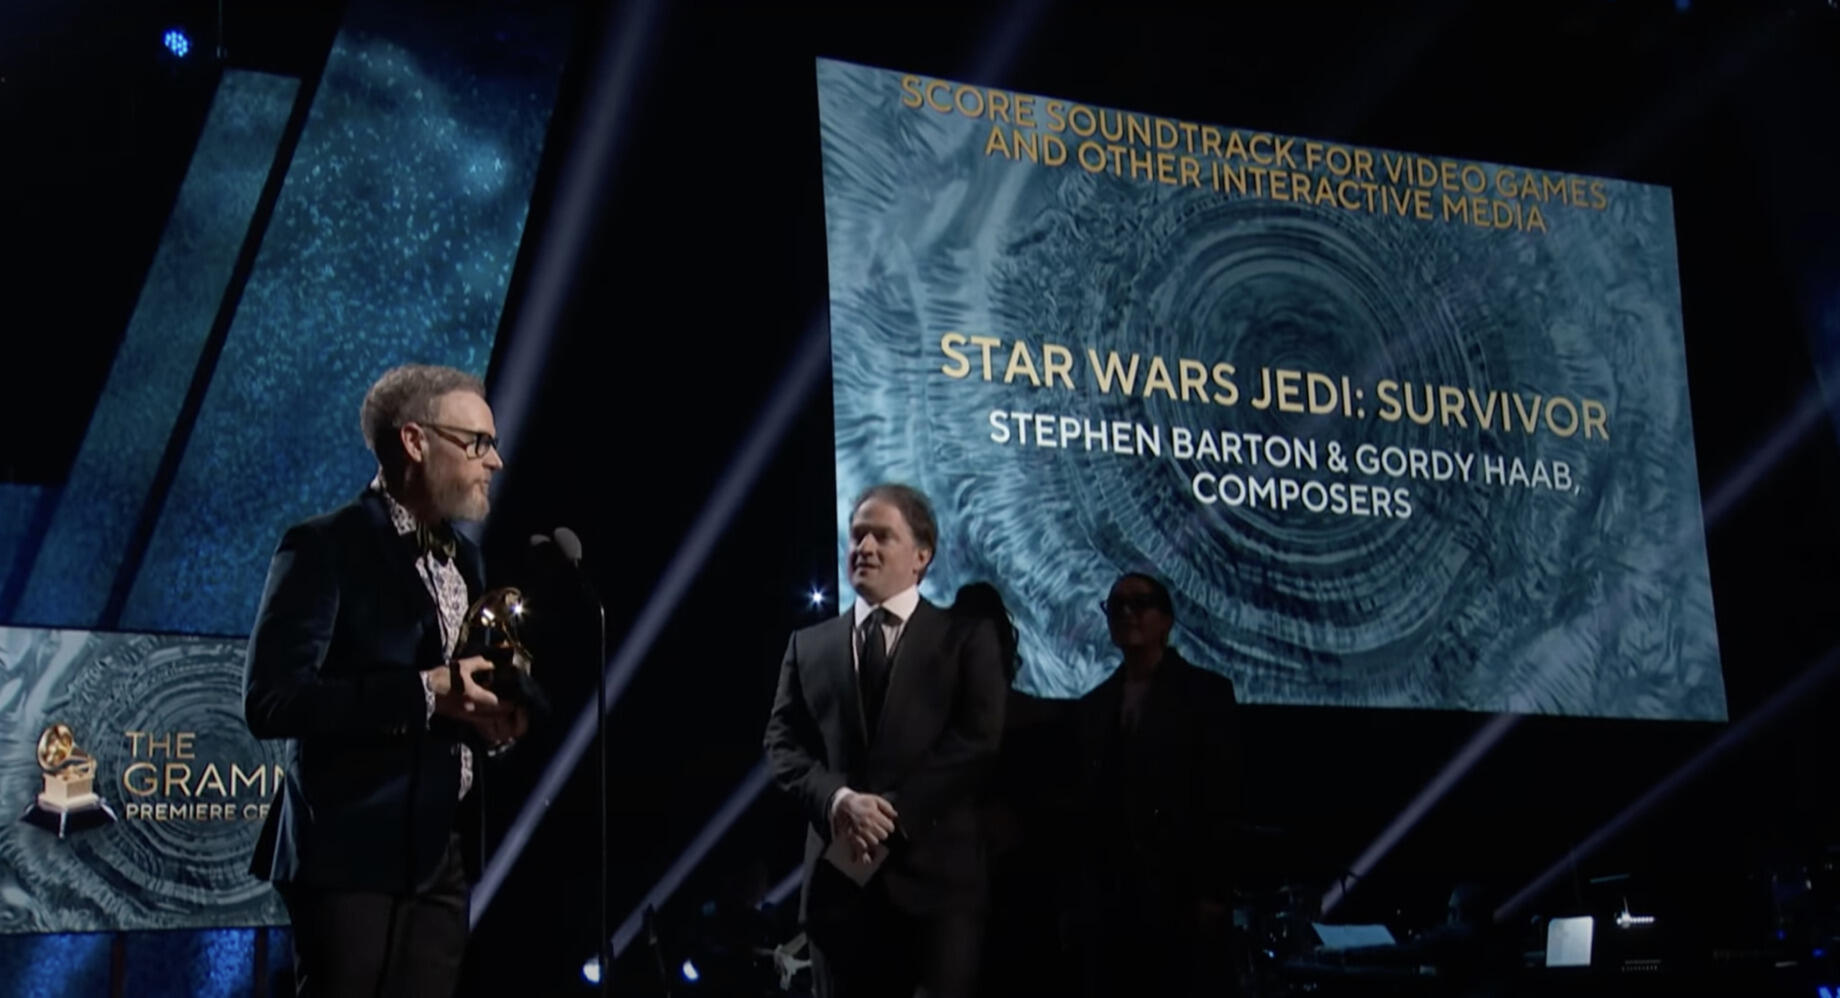 A photo of two men standin on a stage. The man on the left is standing holding an award while the man on the right watches him. Behind them is a screen that reads \"STAR WARS JEDI: SURVIVOR STEPHEN BARTON & GORDY HAAB COMPOSERS) 